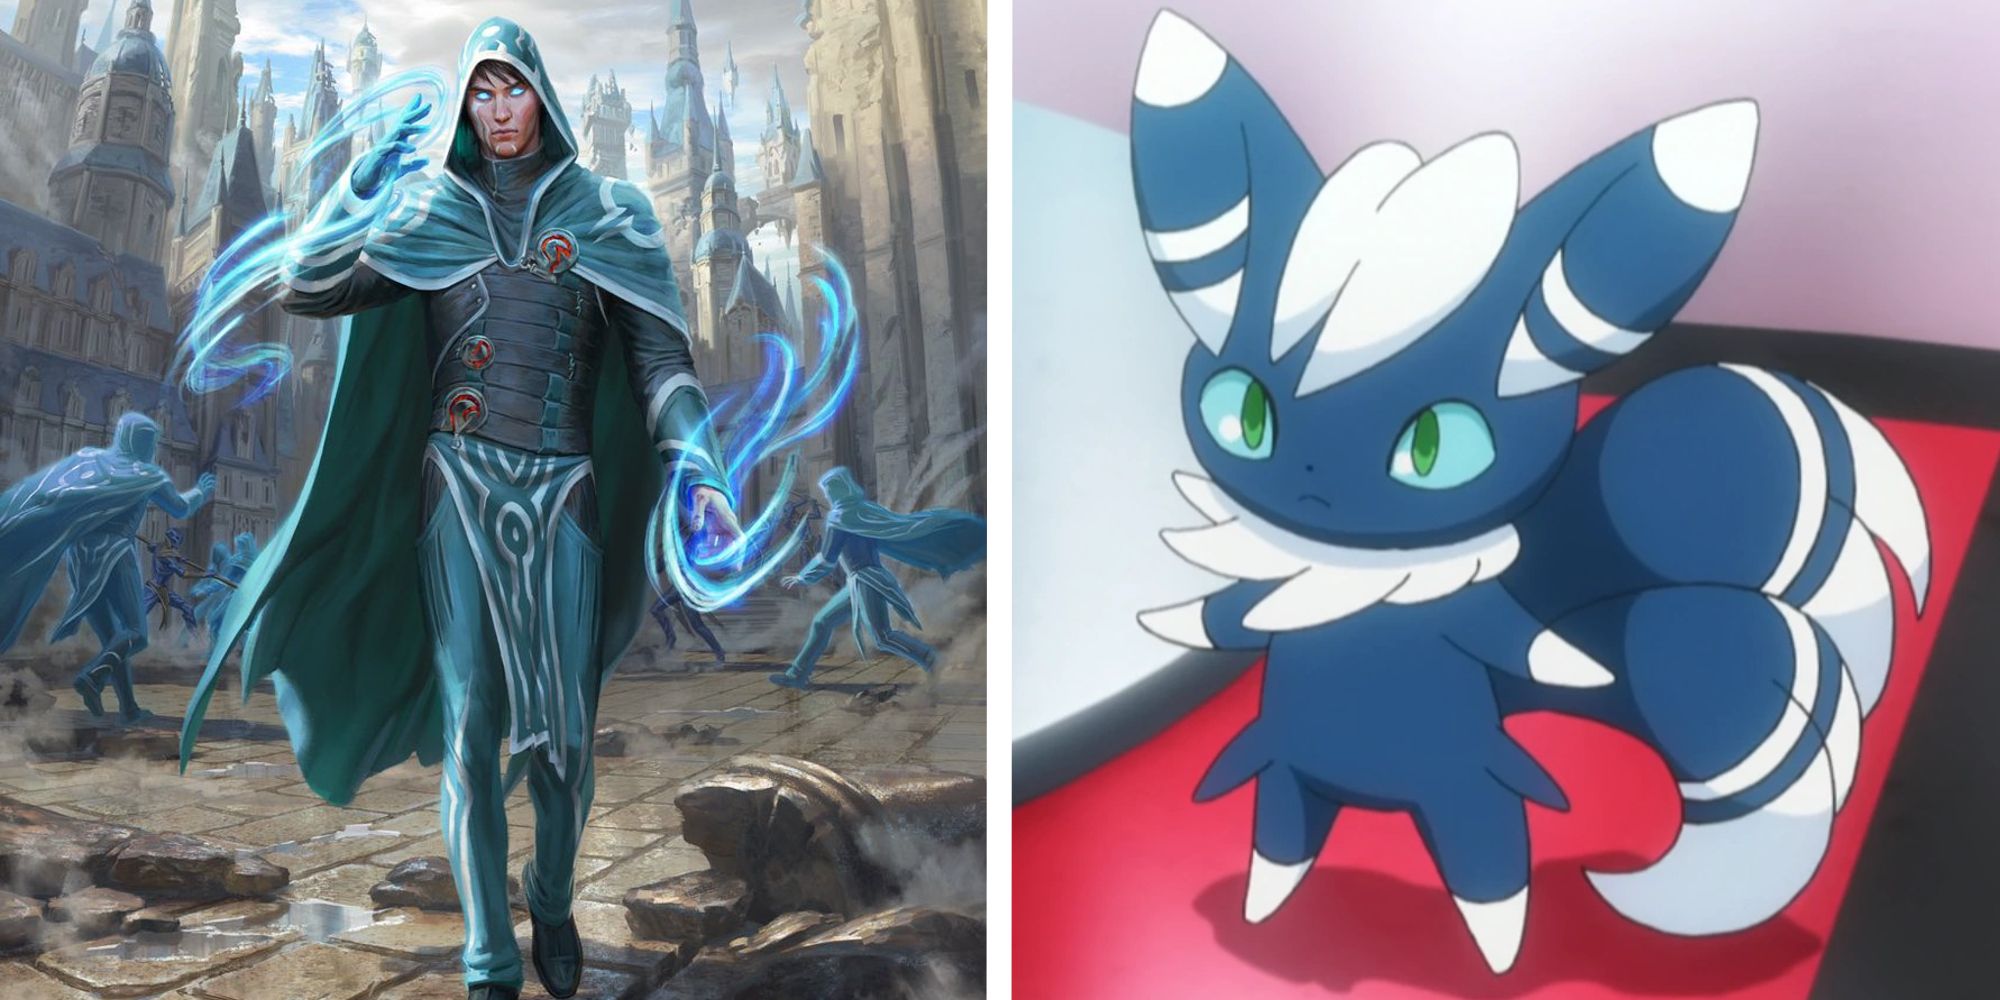 Jace and Meowstic